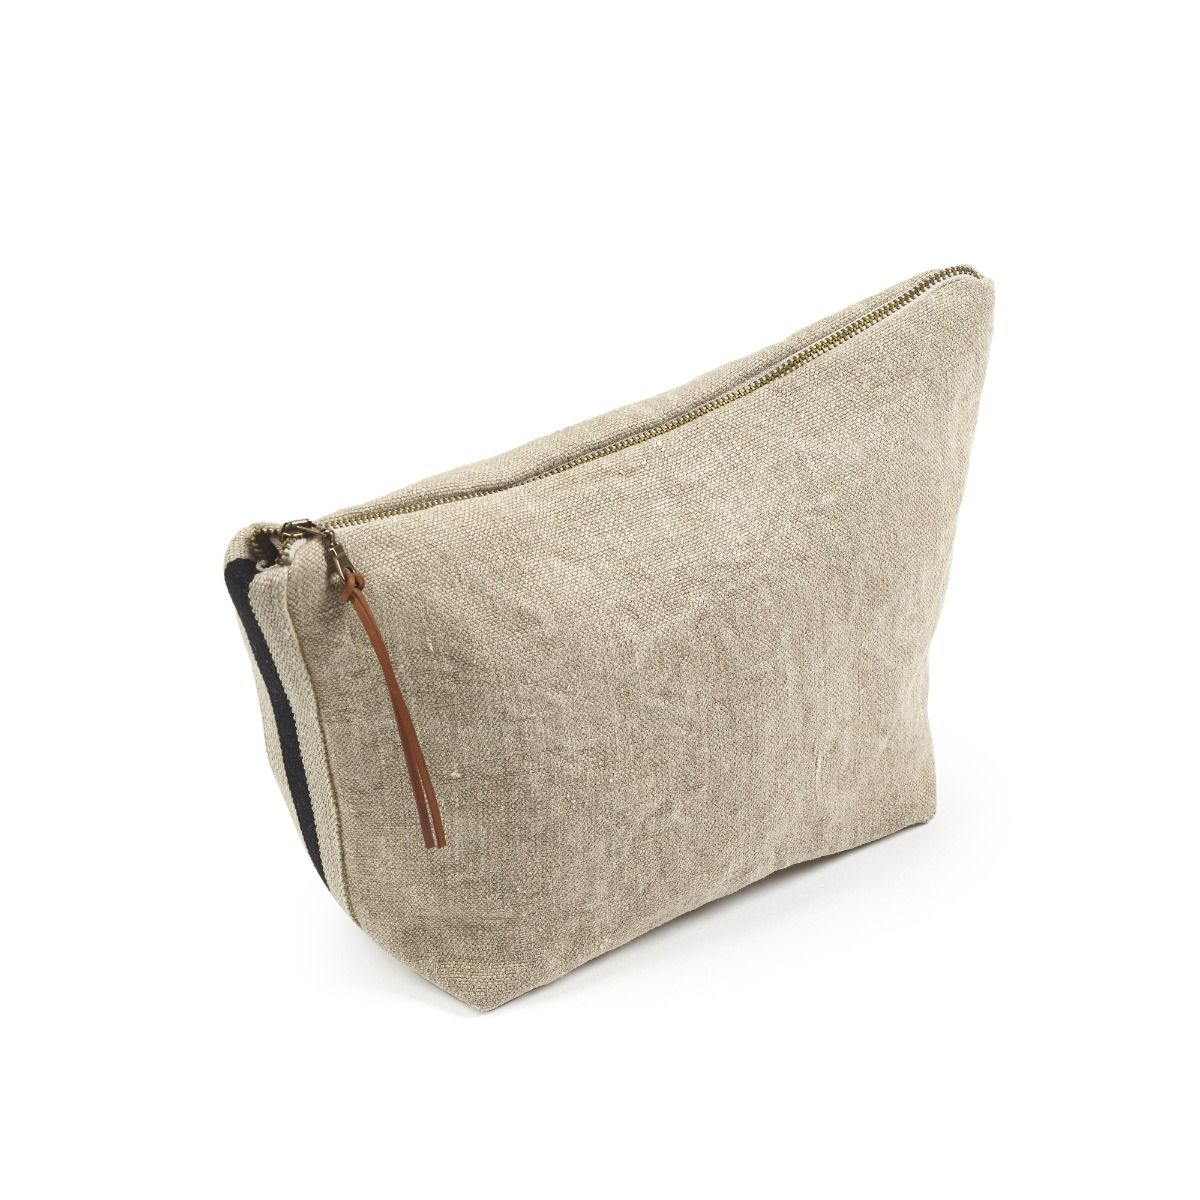 james cosmetic bag toiletry bag pouch by libeco accessories on adorn.house